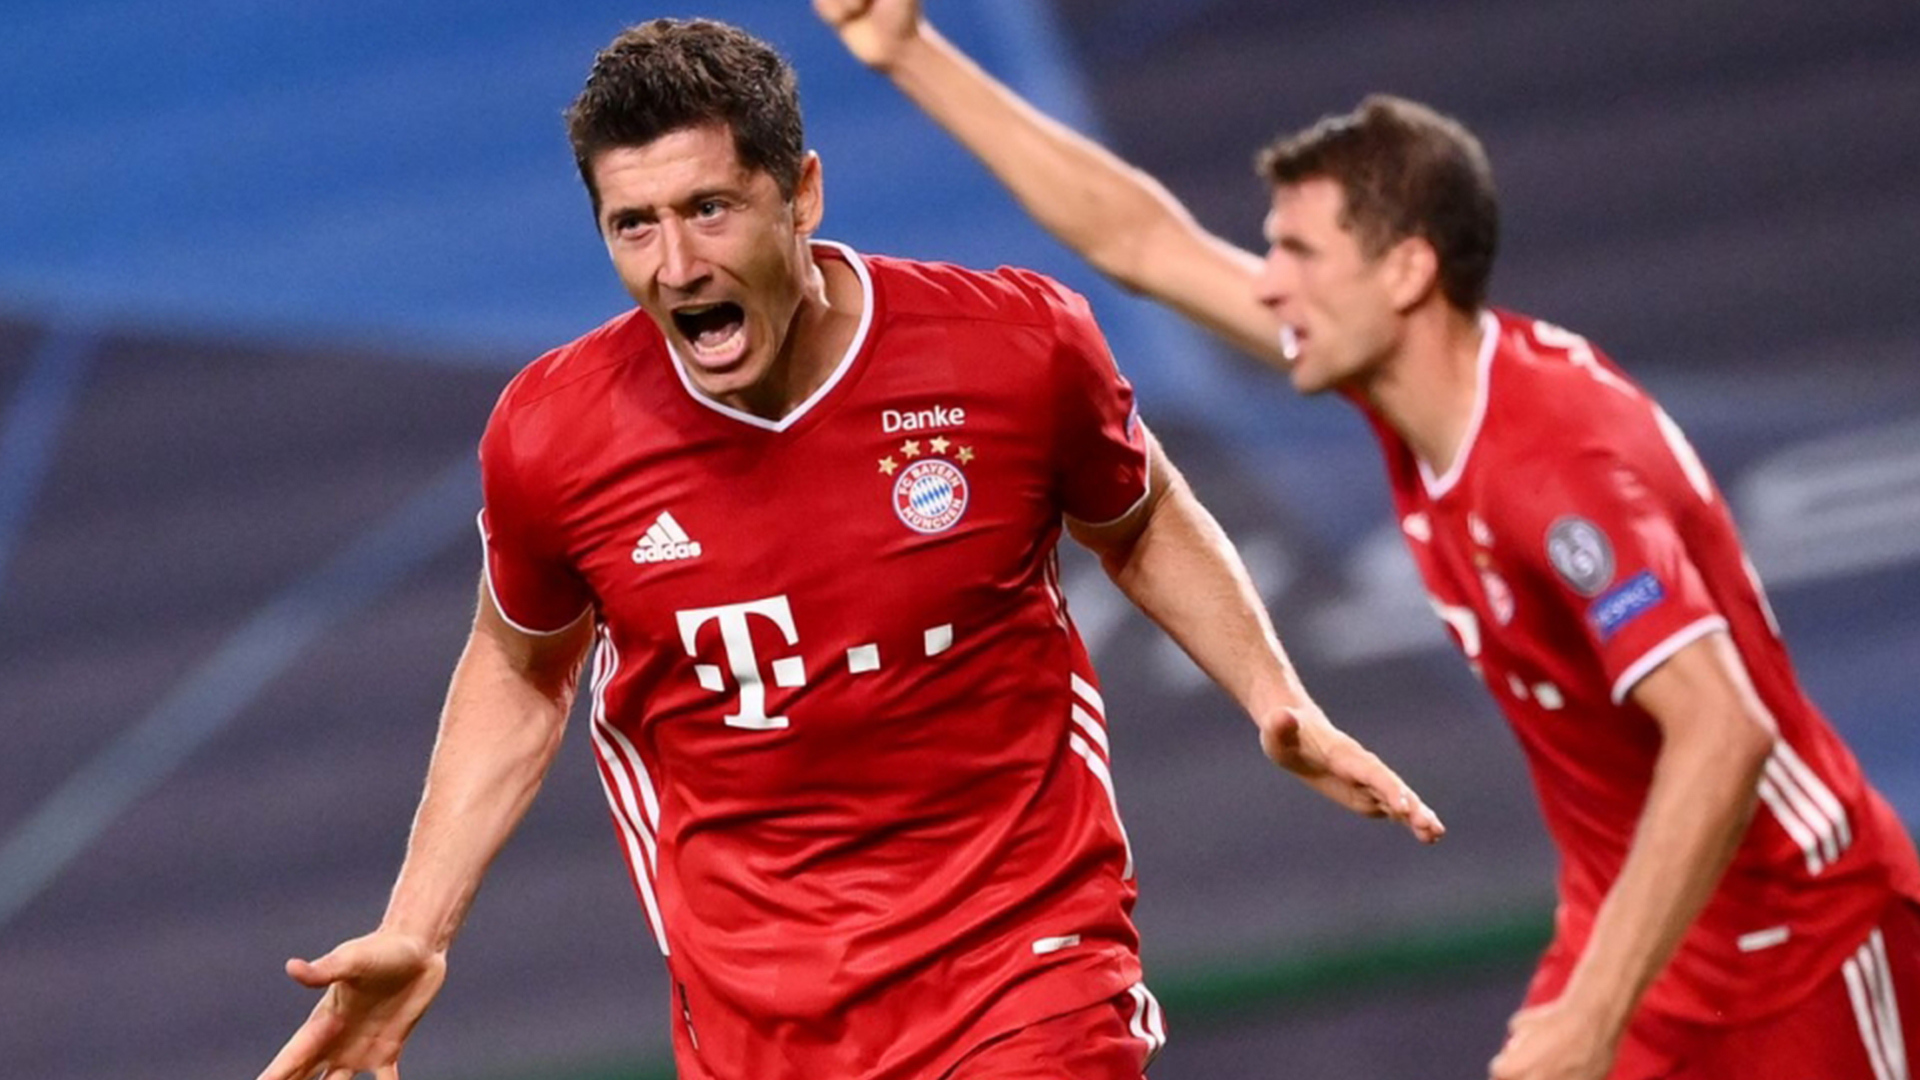 Bayern Munich reaches Champions league Finals beating Lyon - To play against PSG in Finals